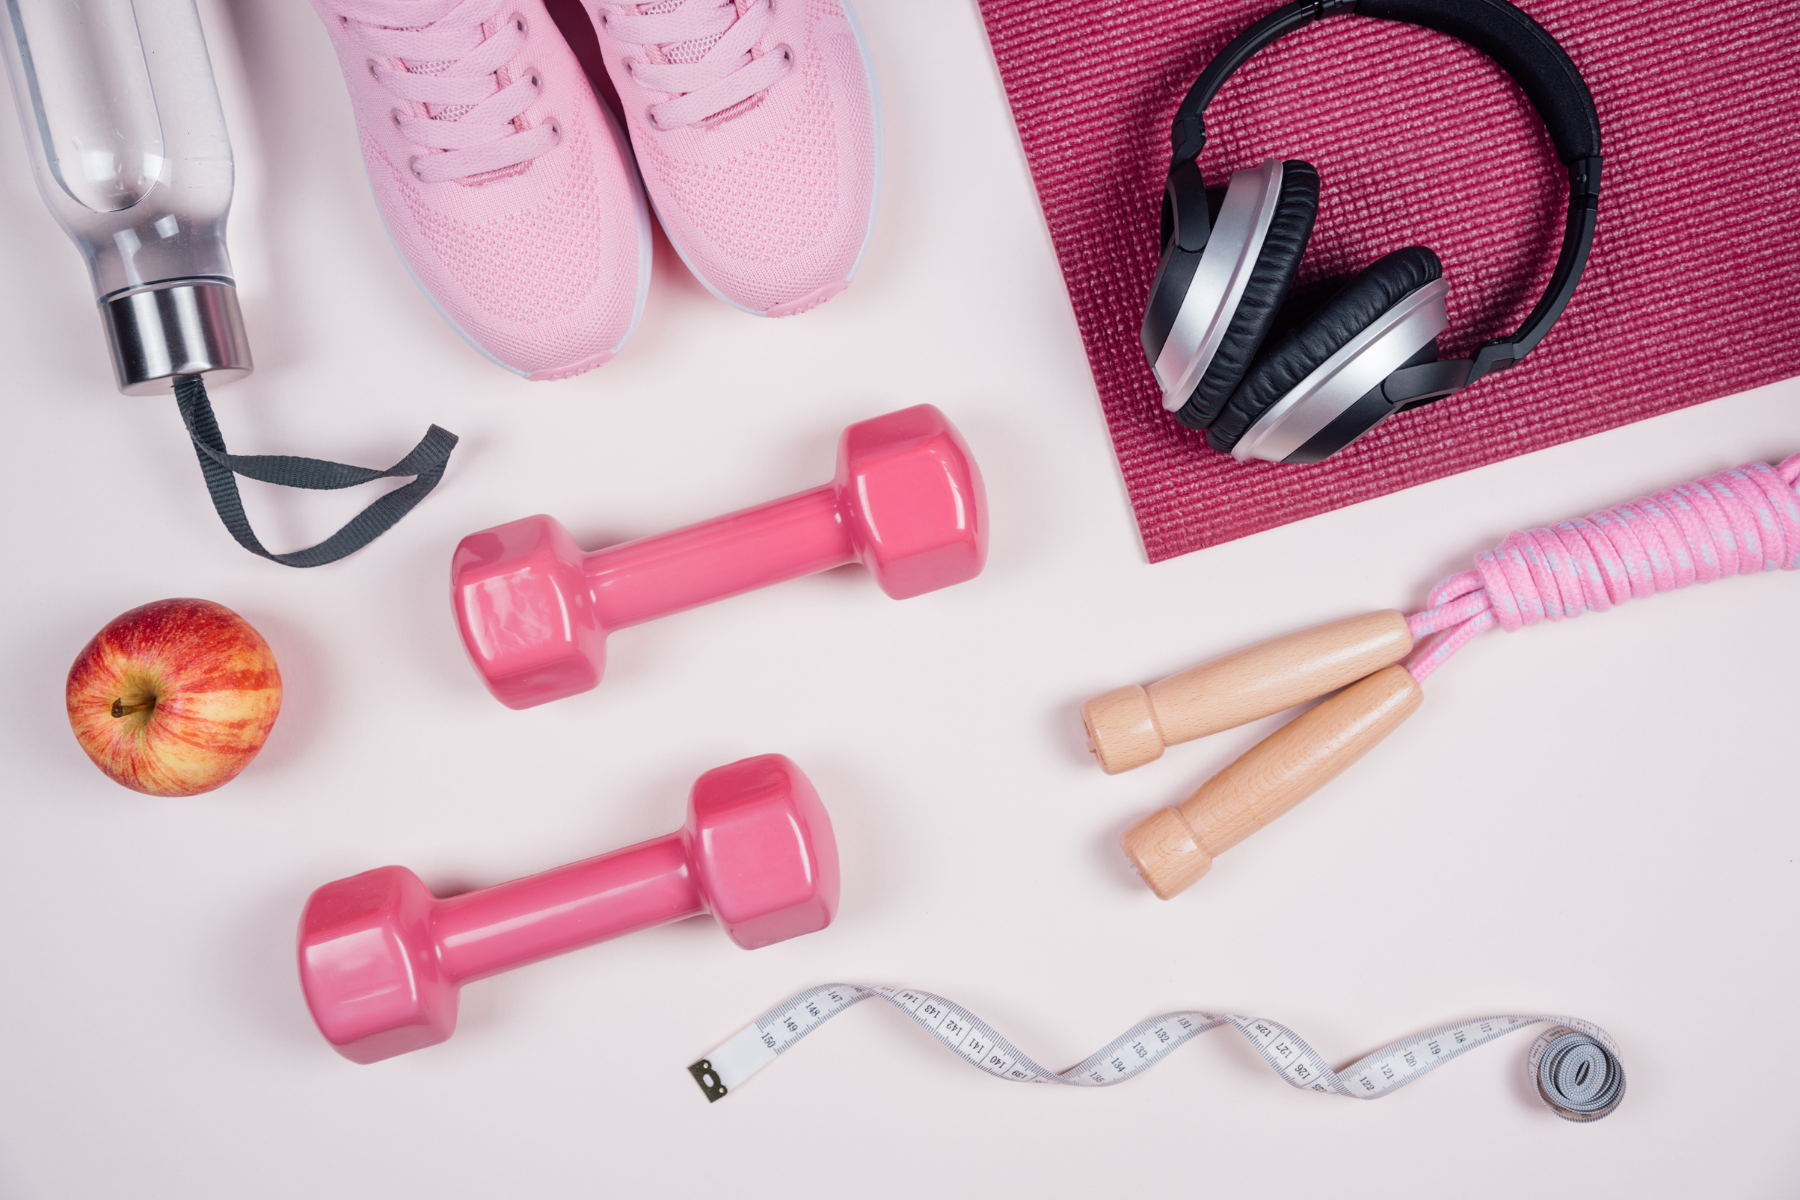 Overhead view of a pile of fitness equipment including weights, jump rope, headphones, yoga mat, running shoes, water bottle, and an apple